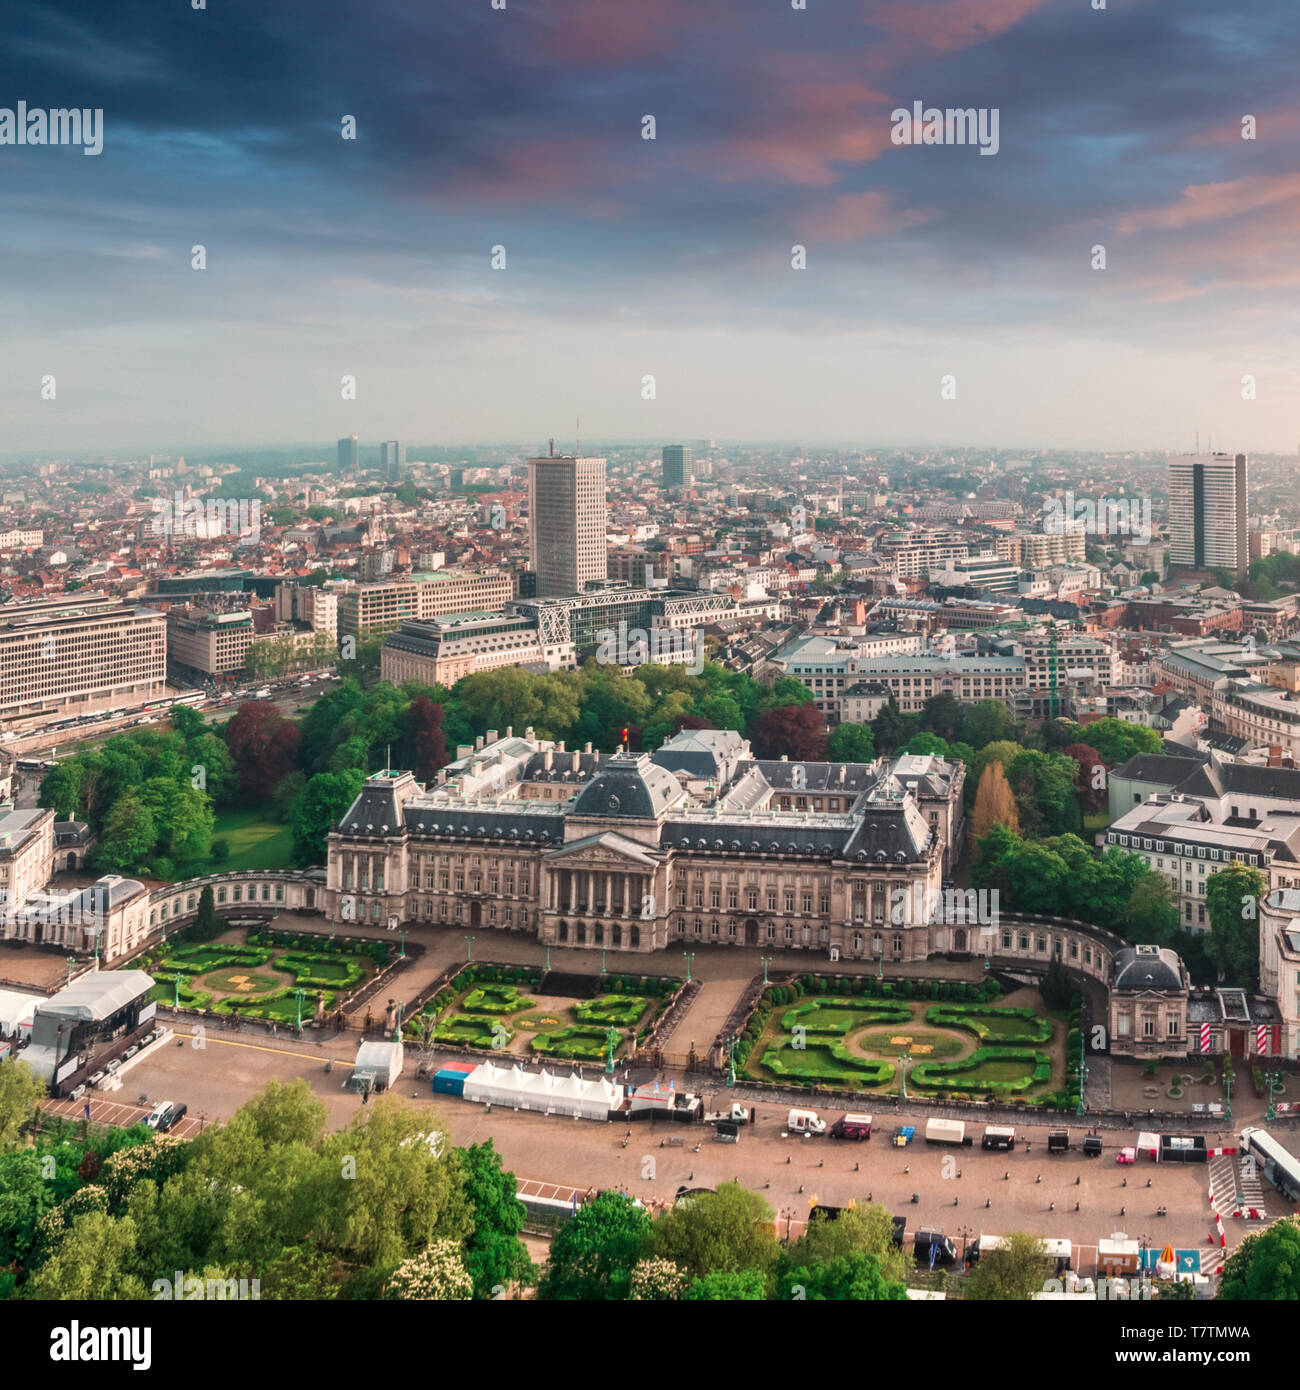 Aerial view of the Royal Palace Brussels, Belgium Stock Photo